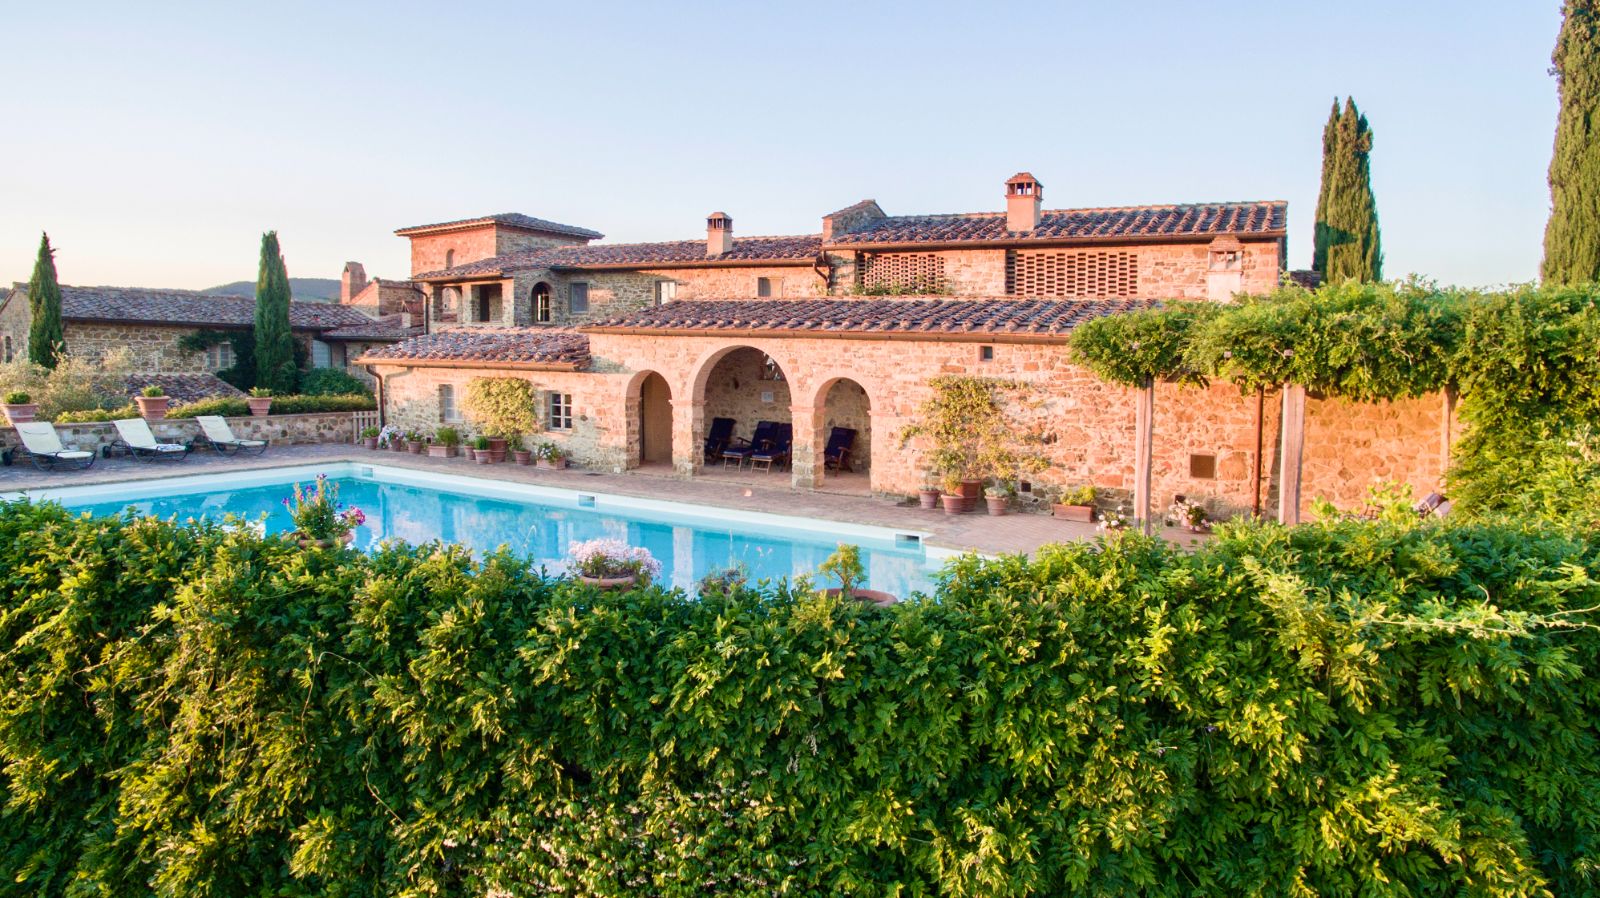 Pool View at Podere Cipressi in Tuscany